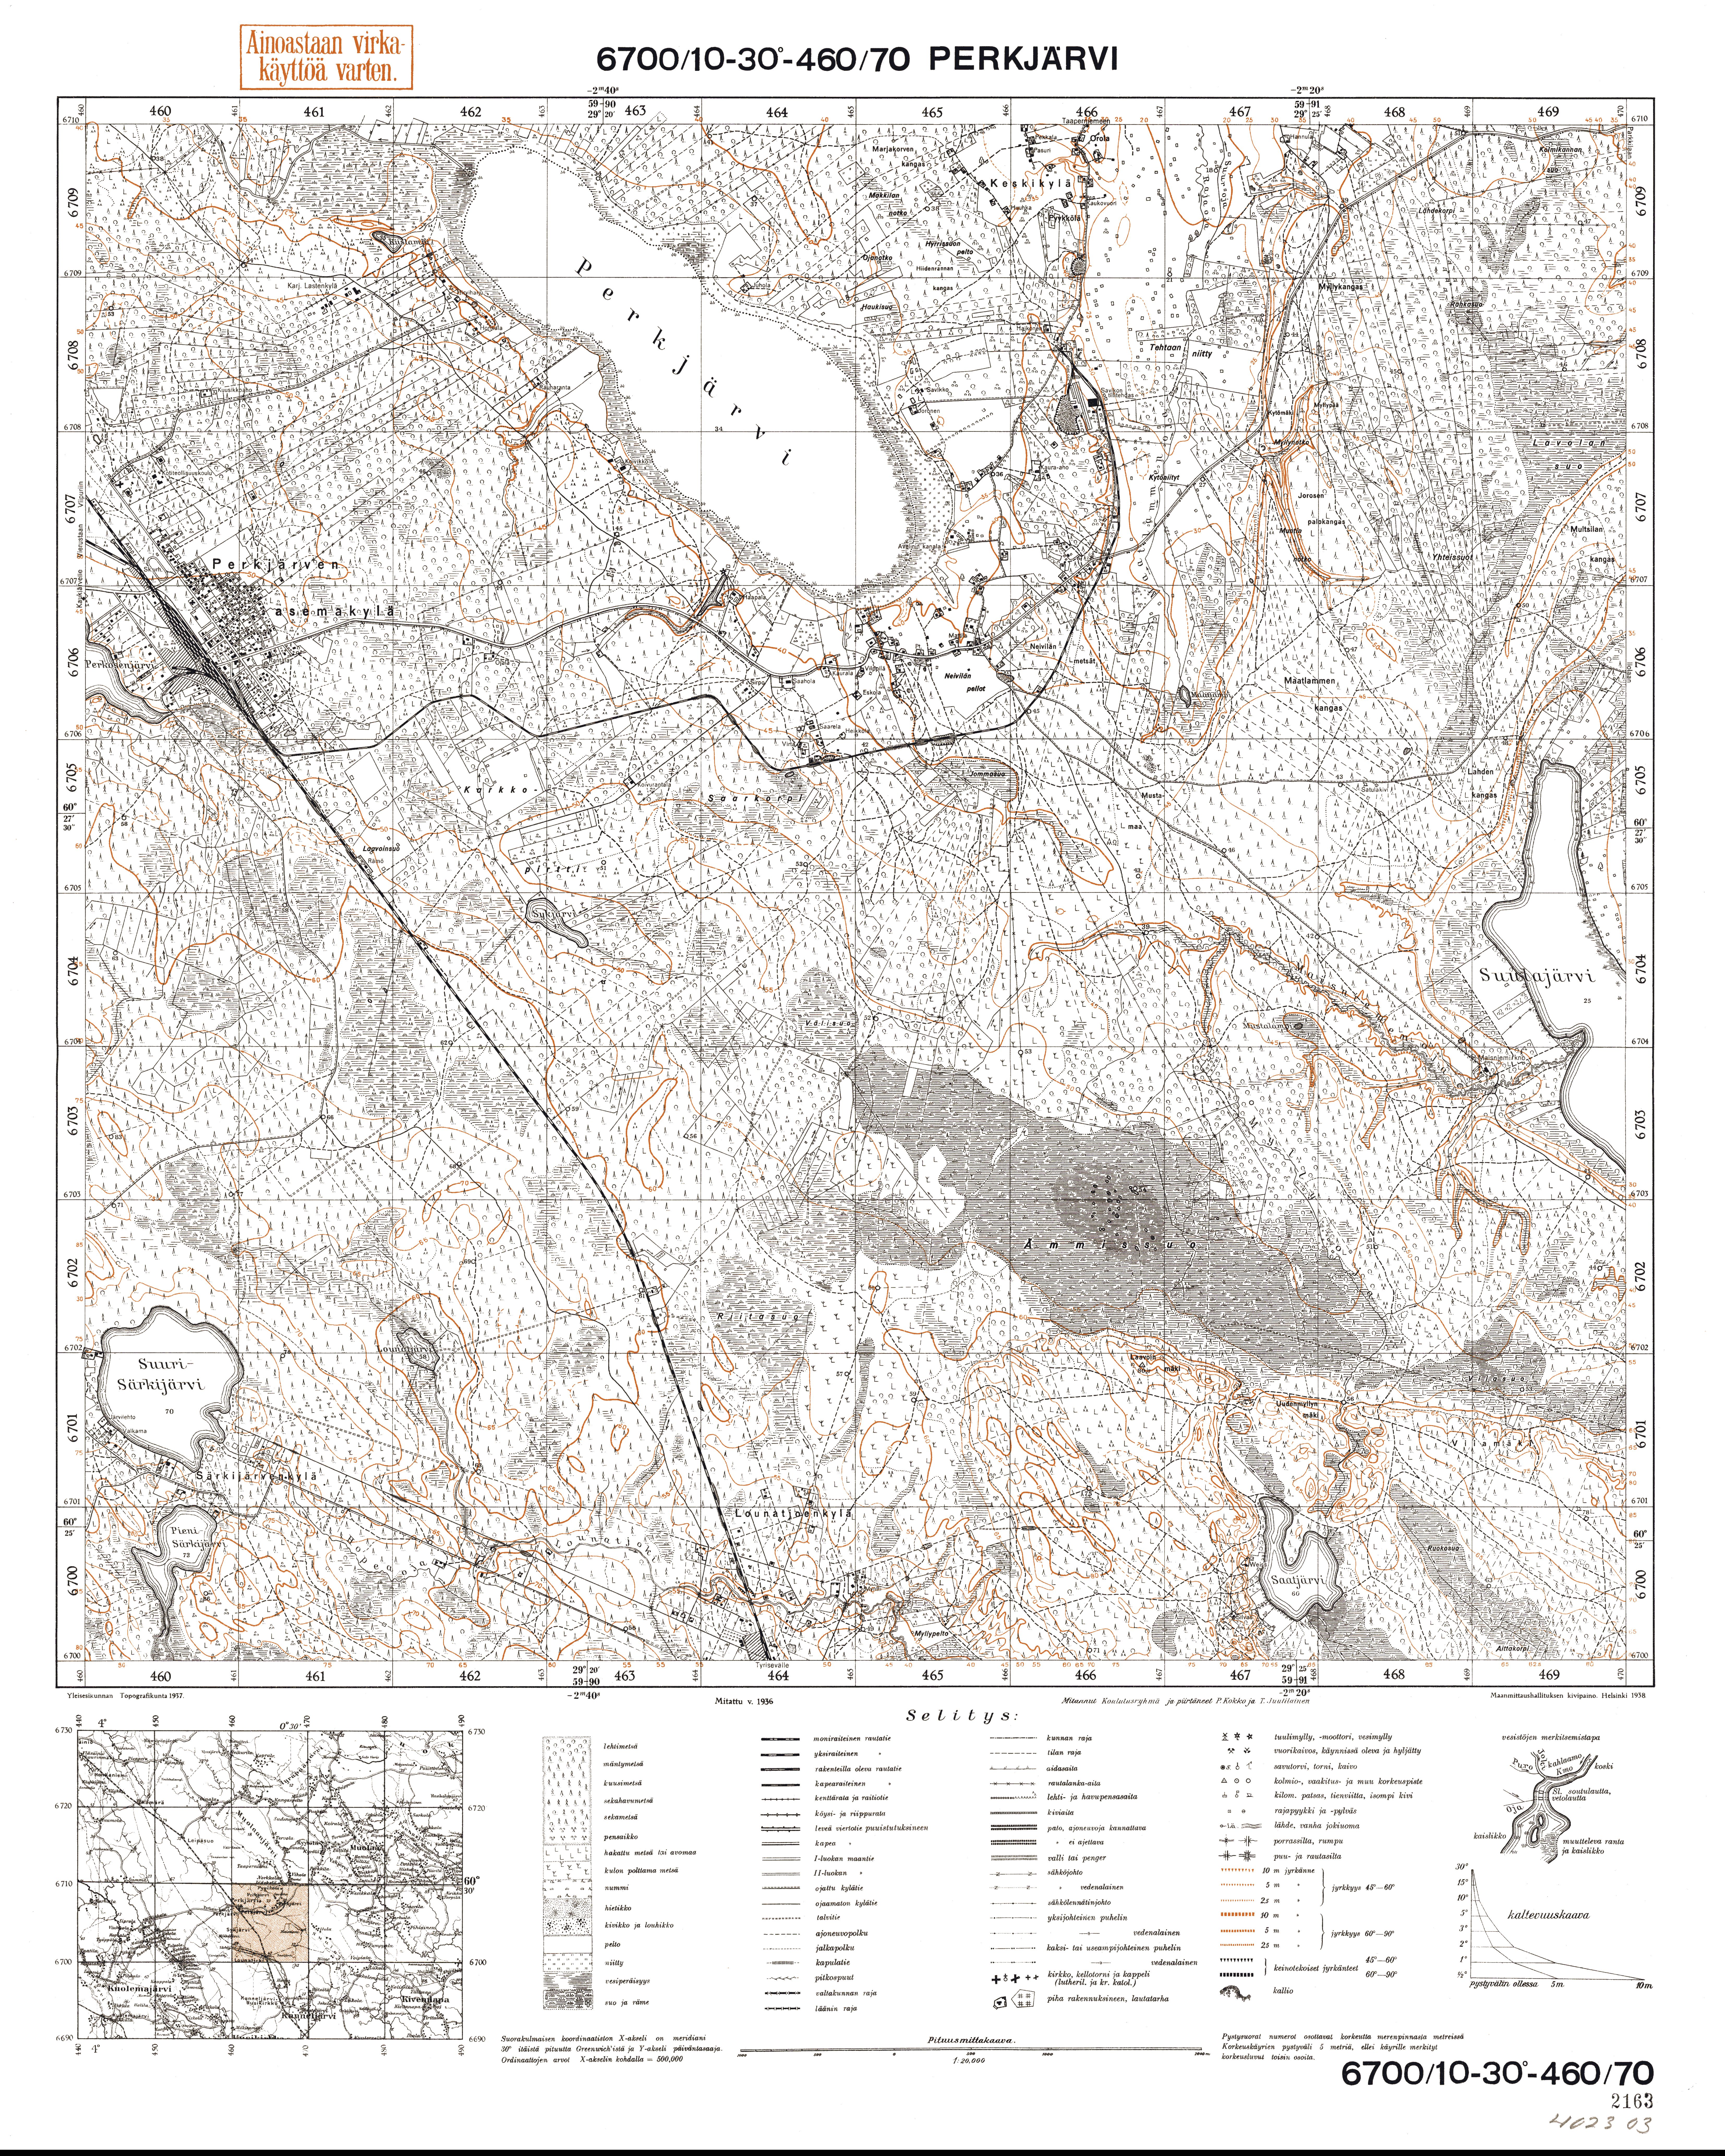 Perkjärvi (Kirillovskoje. Perkjärvi. Topografikartta 402303. Topographic map from 1938. Use the zooming tool to explore in higher level of detail. Obtain as a quality print or high resolution image